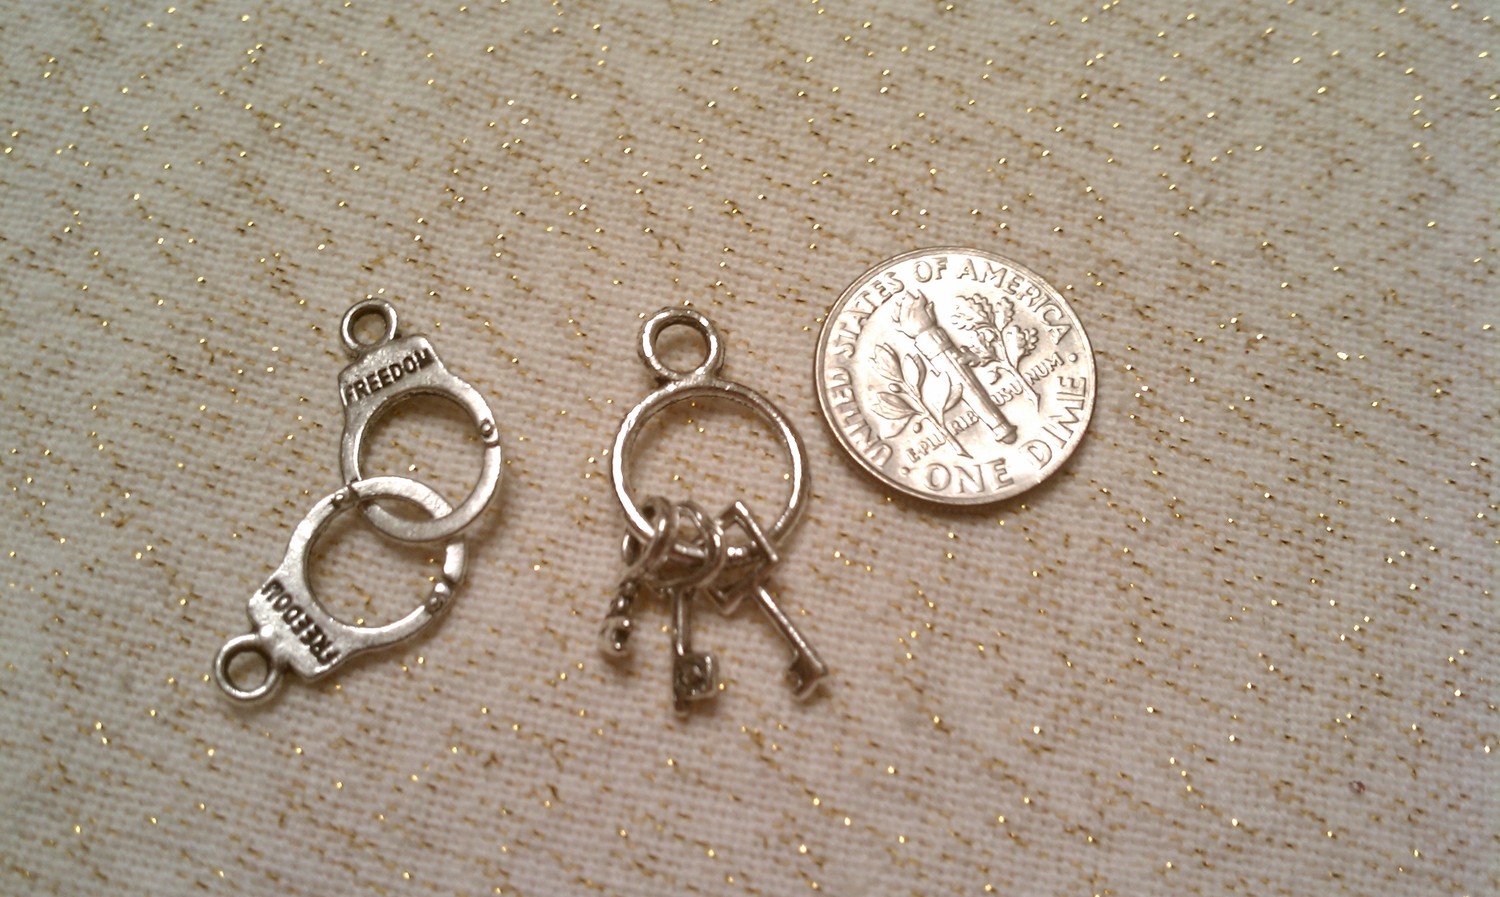 Mini Handcuffs And Jailers Key Ring Charms on Luulla